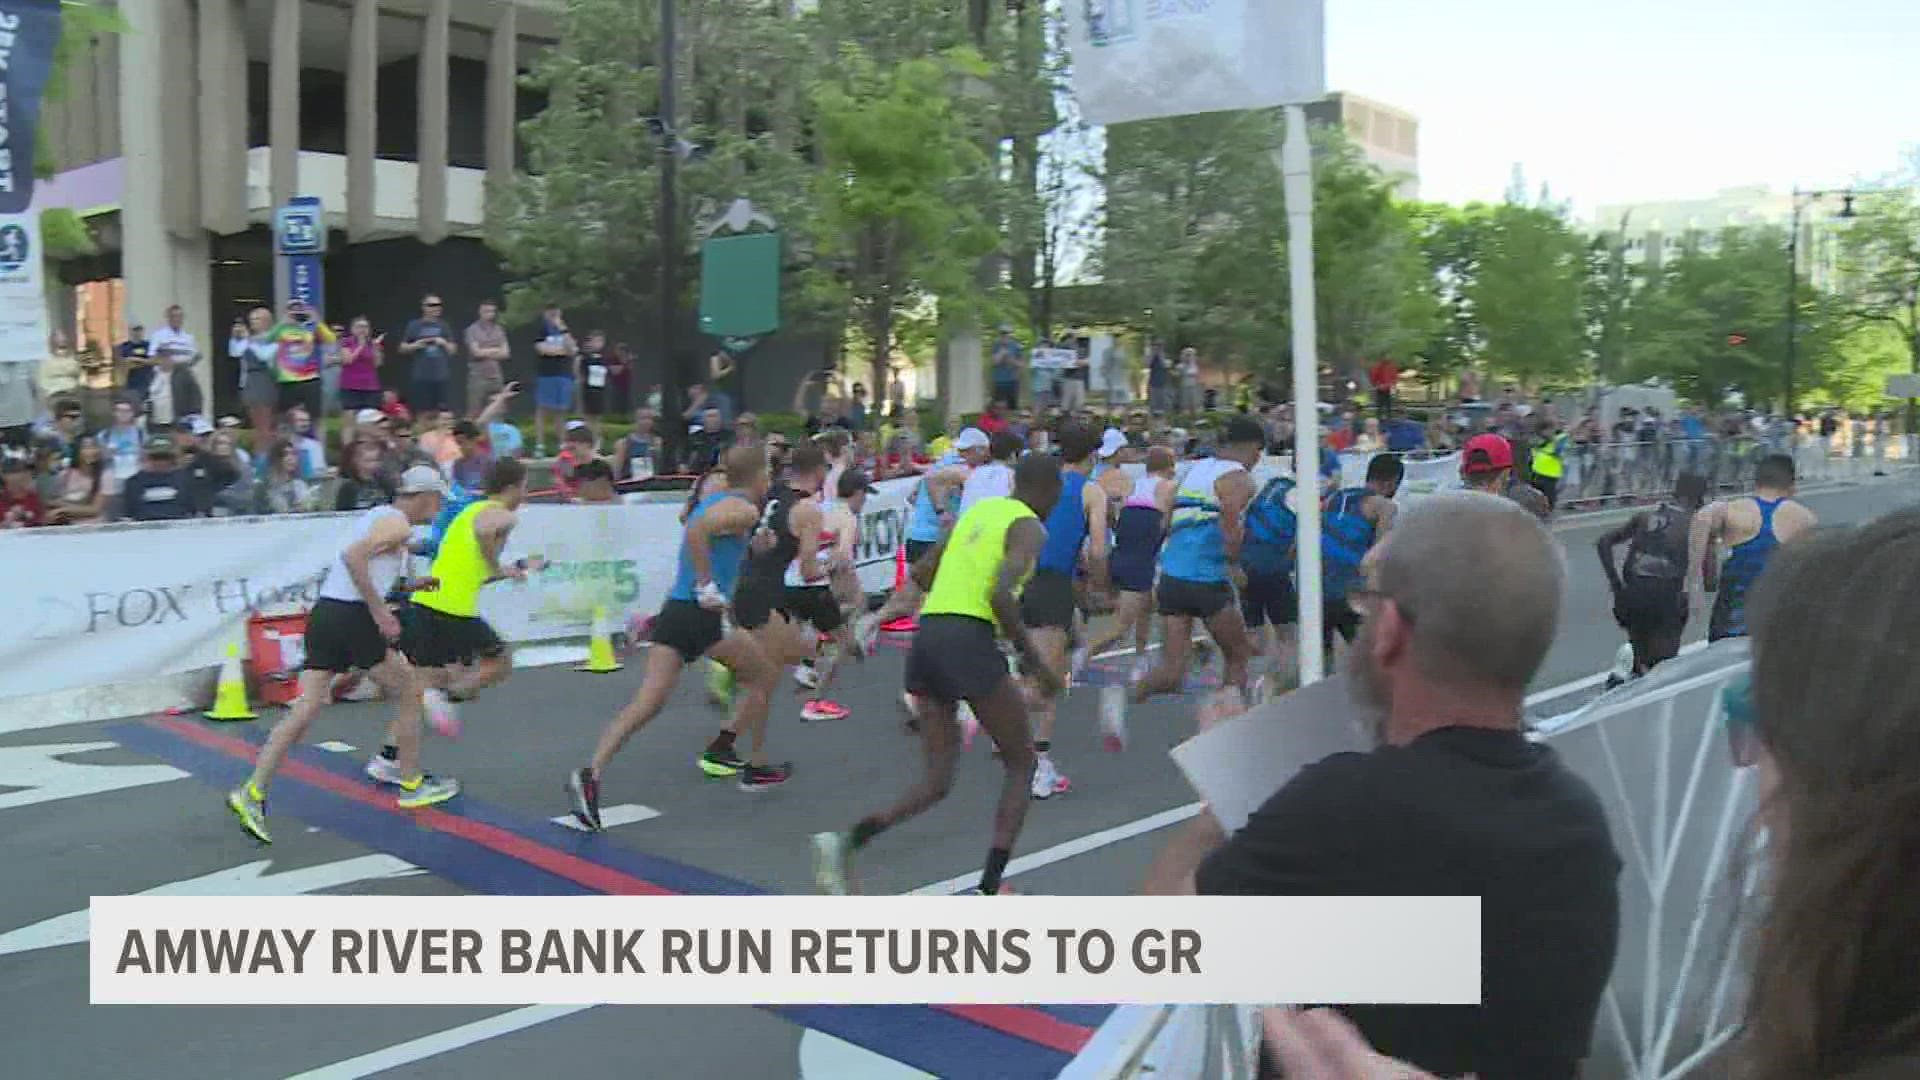 The Amway River Bank Run brings in an estimated 10,000 people from all over the world to downtown Grand Rapids.